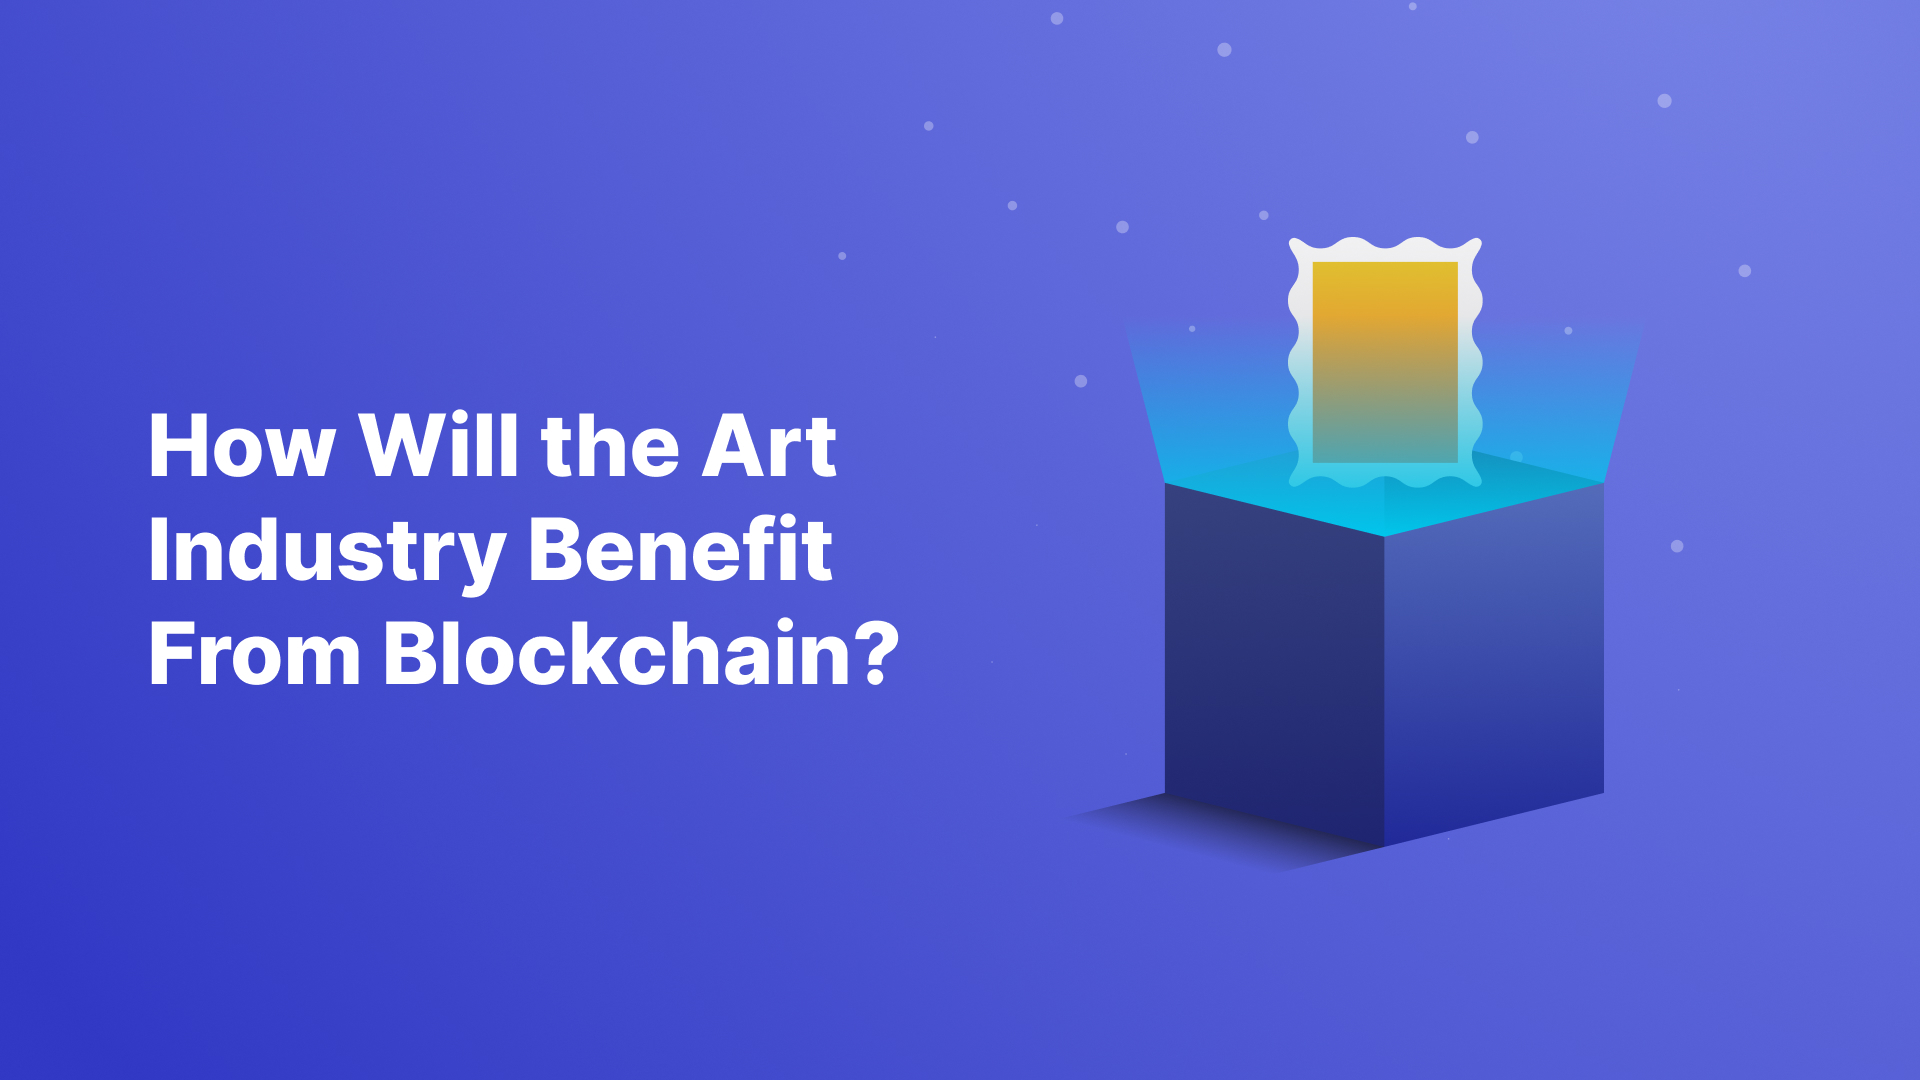 How Will the Art Industry Benefit From Blockchain?